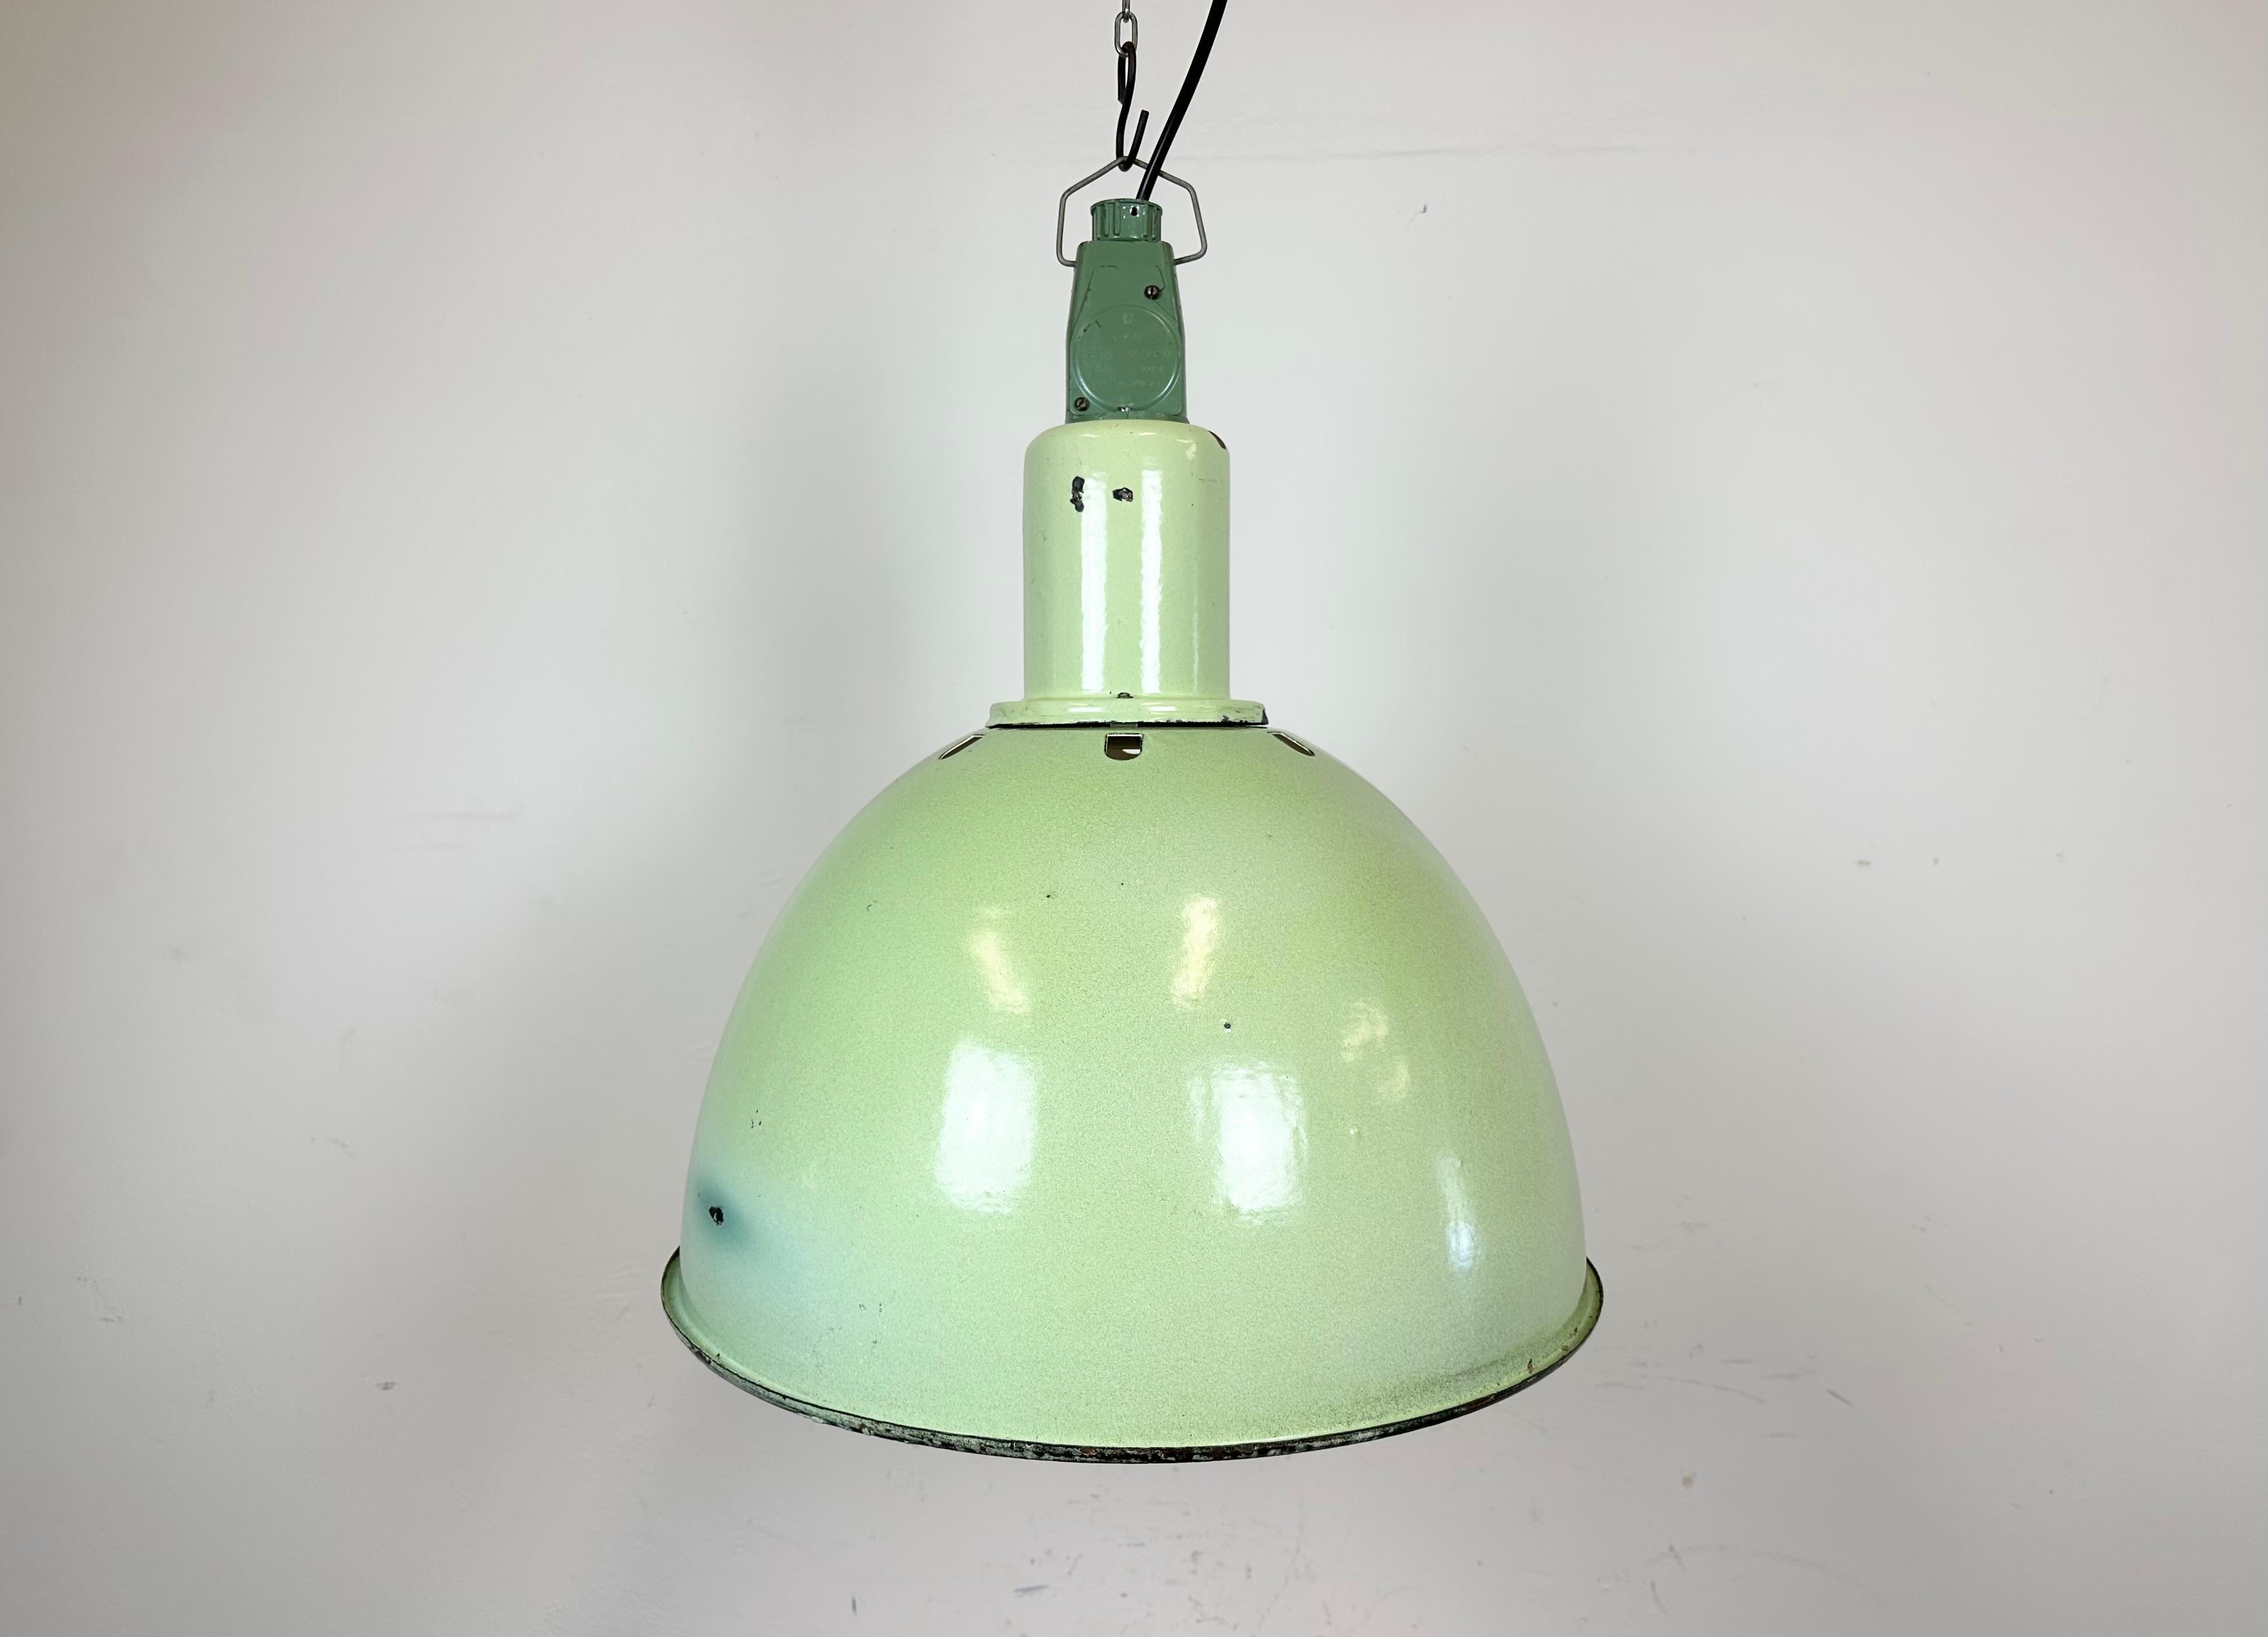 - Vintage Industrial lamp from the 1960s 
- Made in former Soviet Union
- Green enamel shade and neck
- White enamel inside the shade
- Cast aluminium top 
- Socket requires standard E27/ E26 lightbulbs 
- New wire 
- Lampshade diameter: 44 cm
-